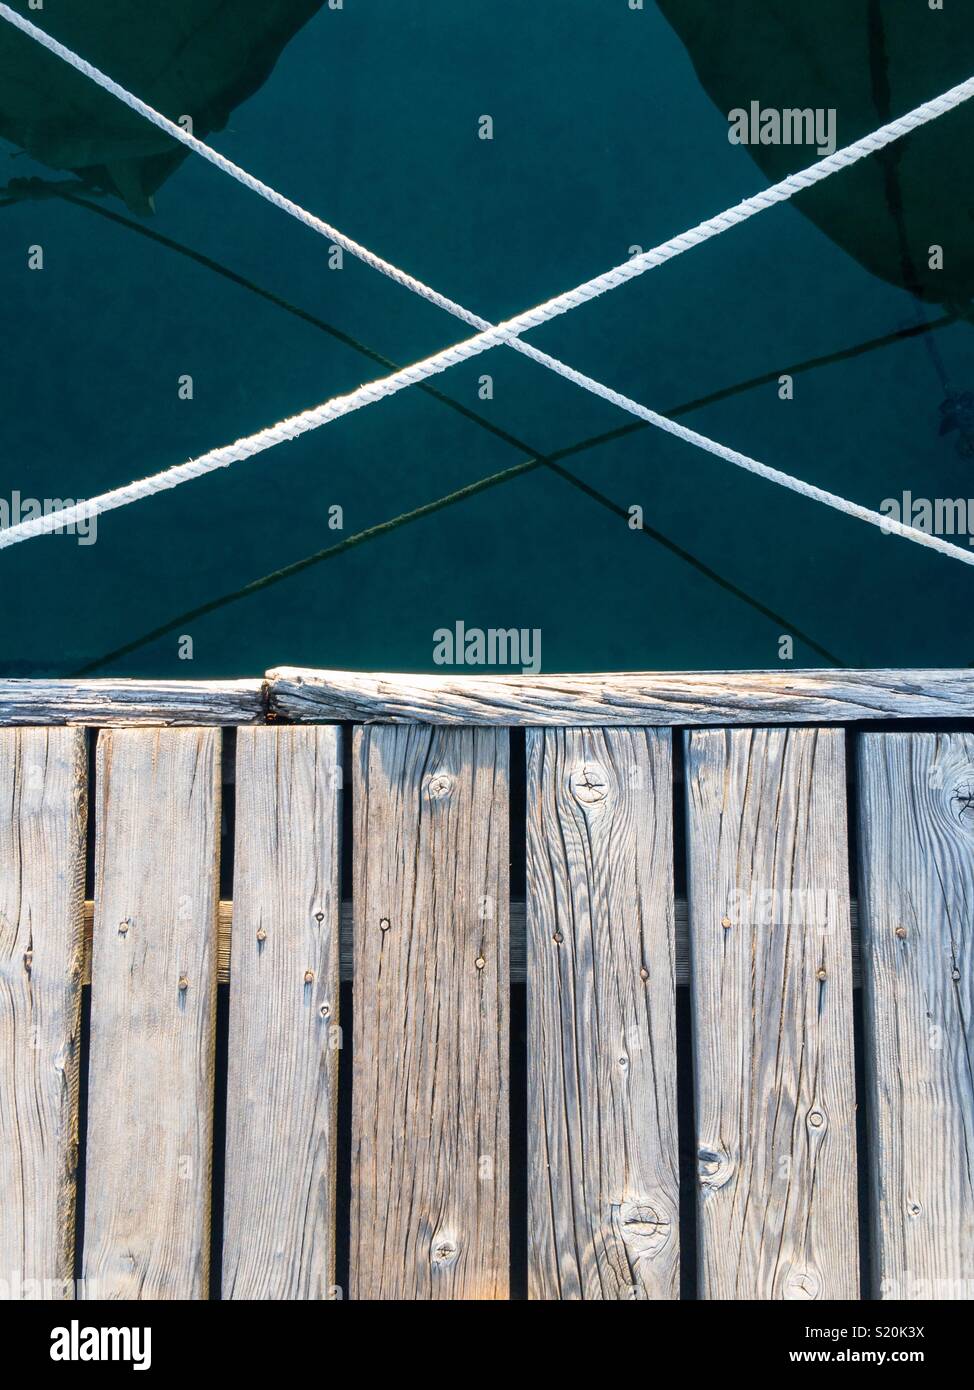 Wooden dock and two ropes over caln blue sea in harbor Stock Photo